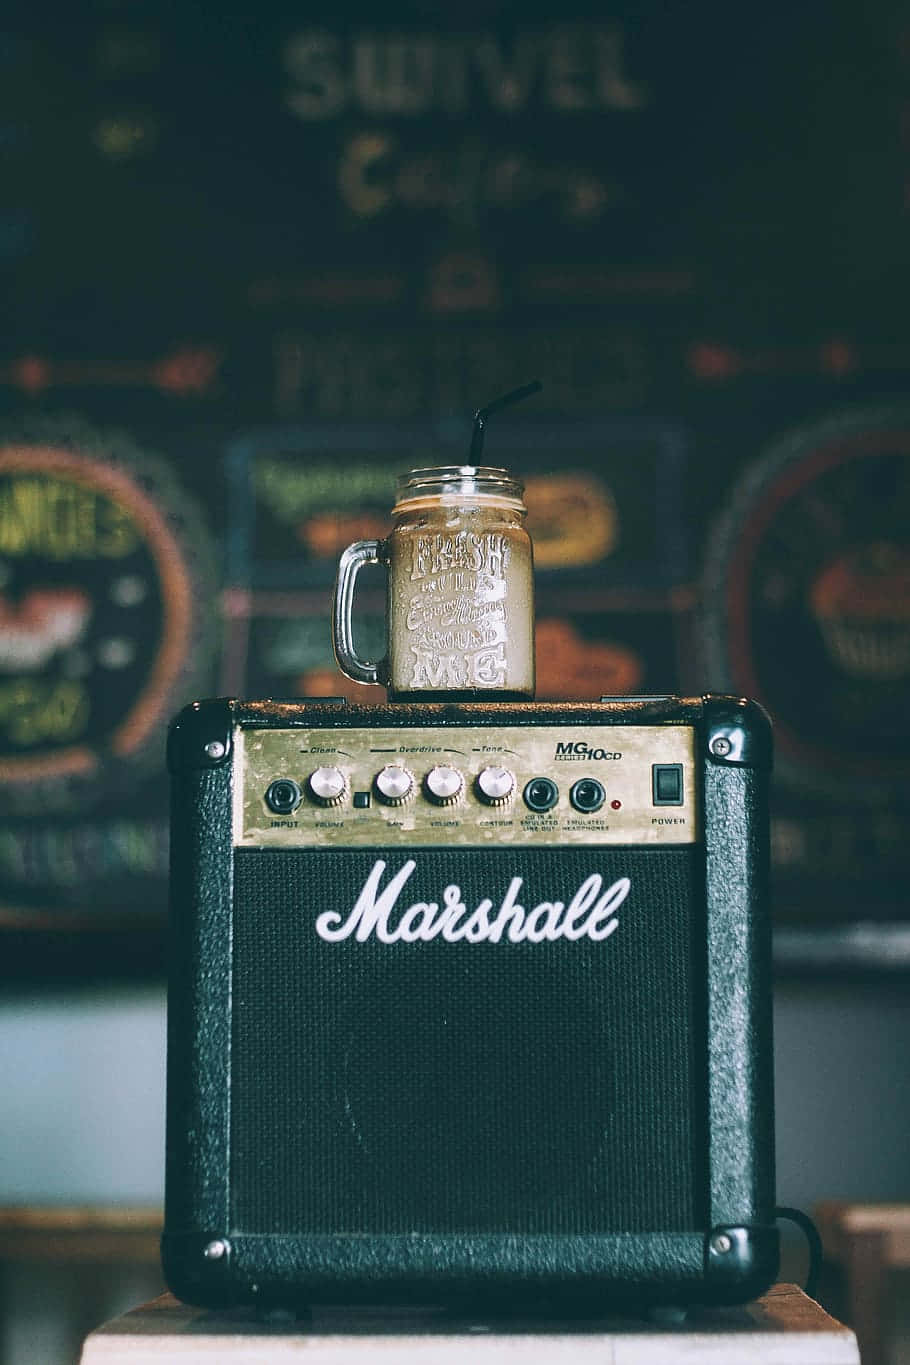 Brighten Up with the Marshall Logo